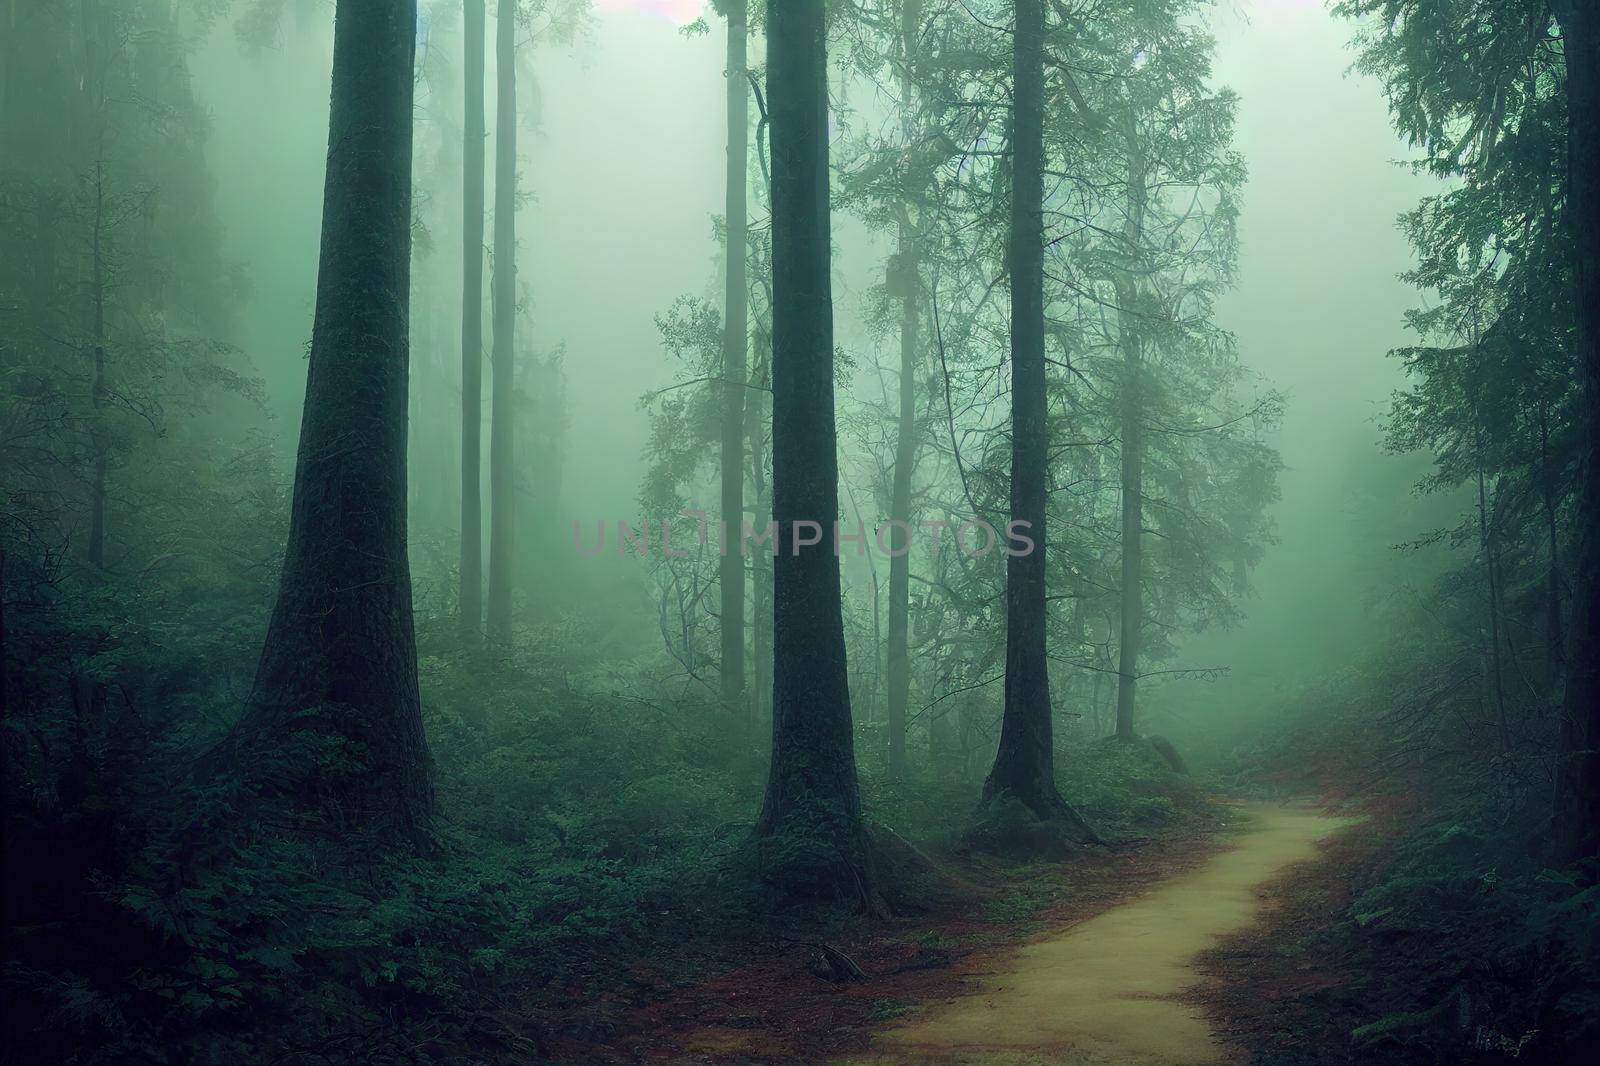 The trail in the misty forest. Misty forest trail. Trail in misty forest. Forest mist trail. Misty forest landscape. High quality illustration